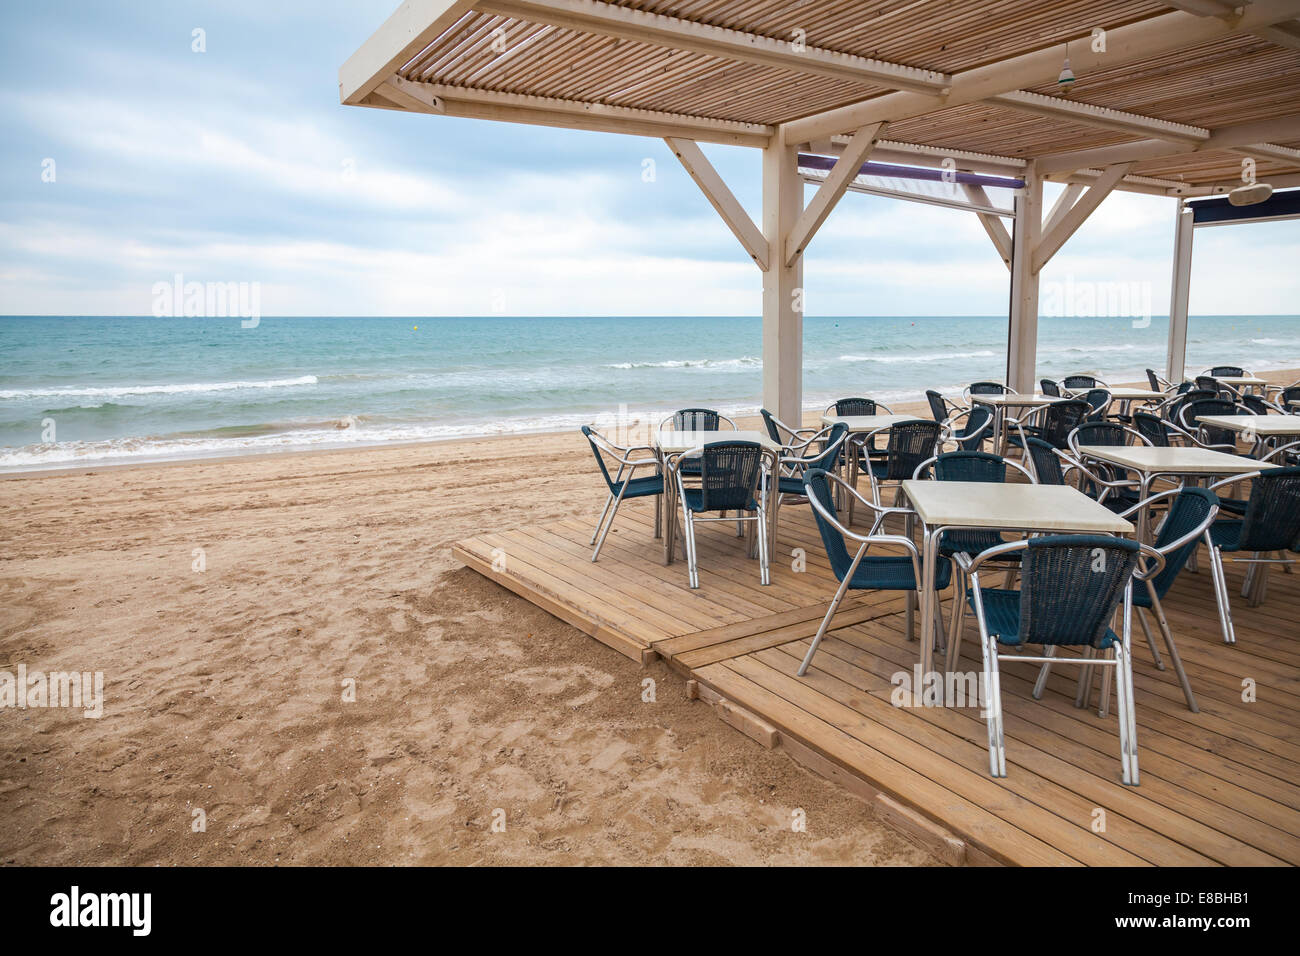 Sea side bar interior with wooden floor and metal armchairs on the sandy beach in Spain Stock Photo